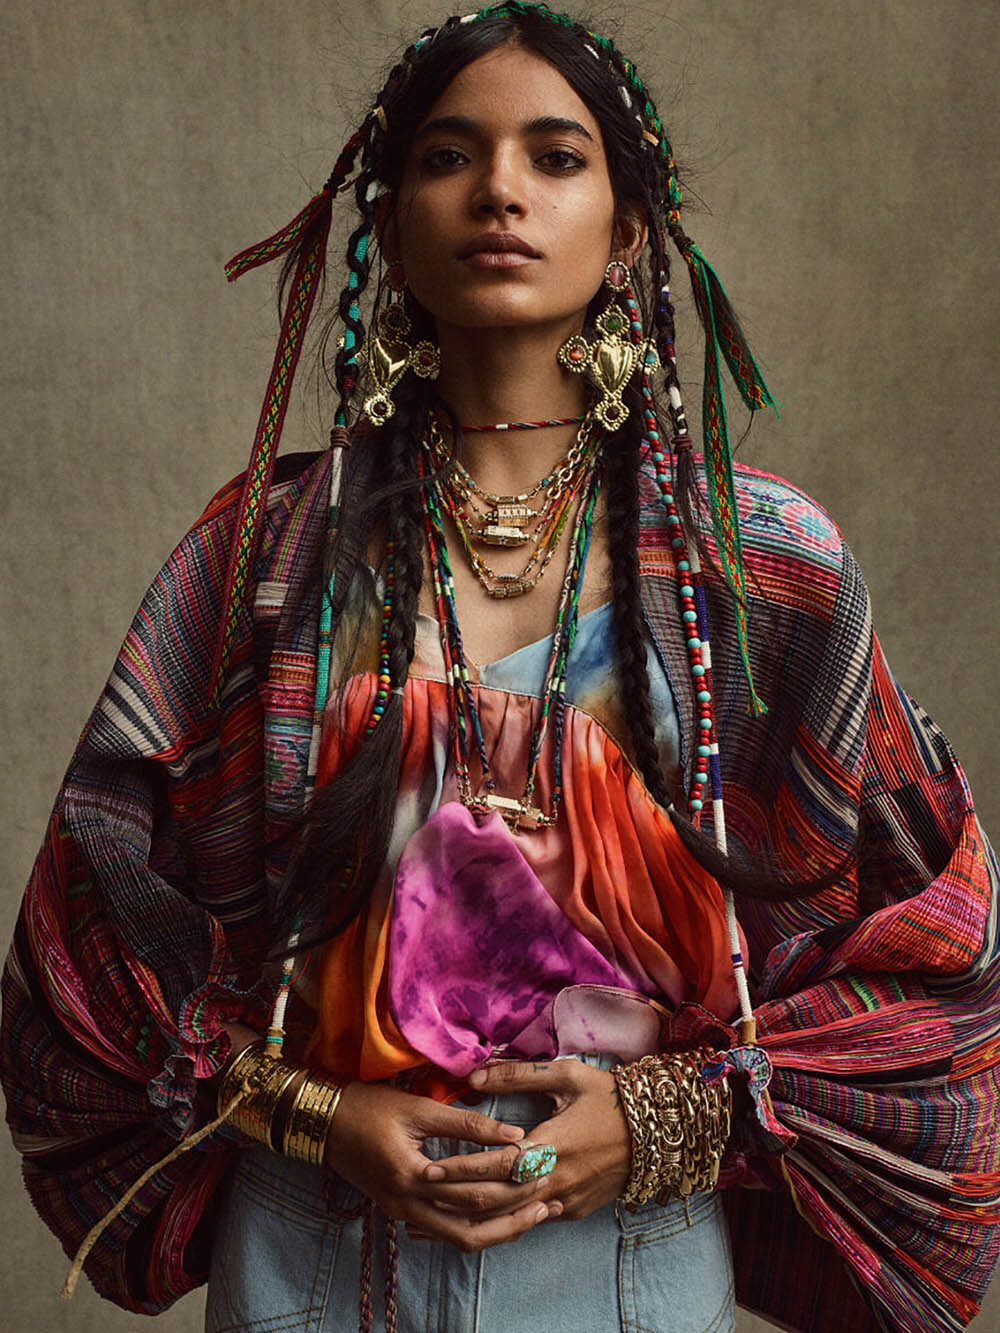 Pooja Mor and Amrit by Gregory Harris for Vogue Paris April 2020